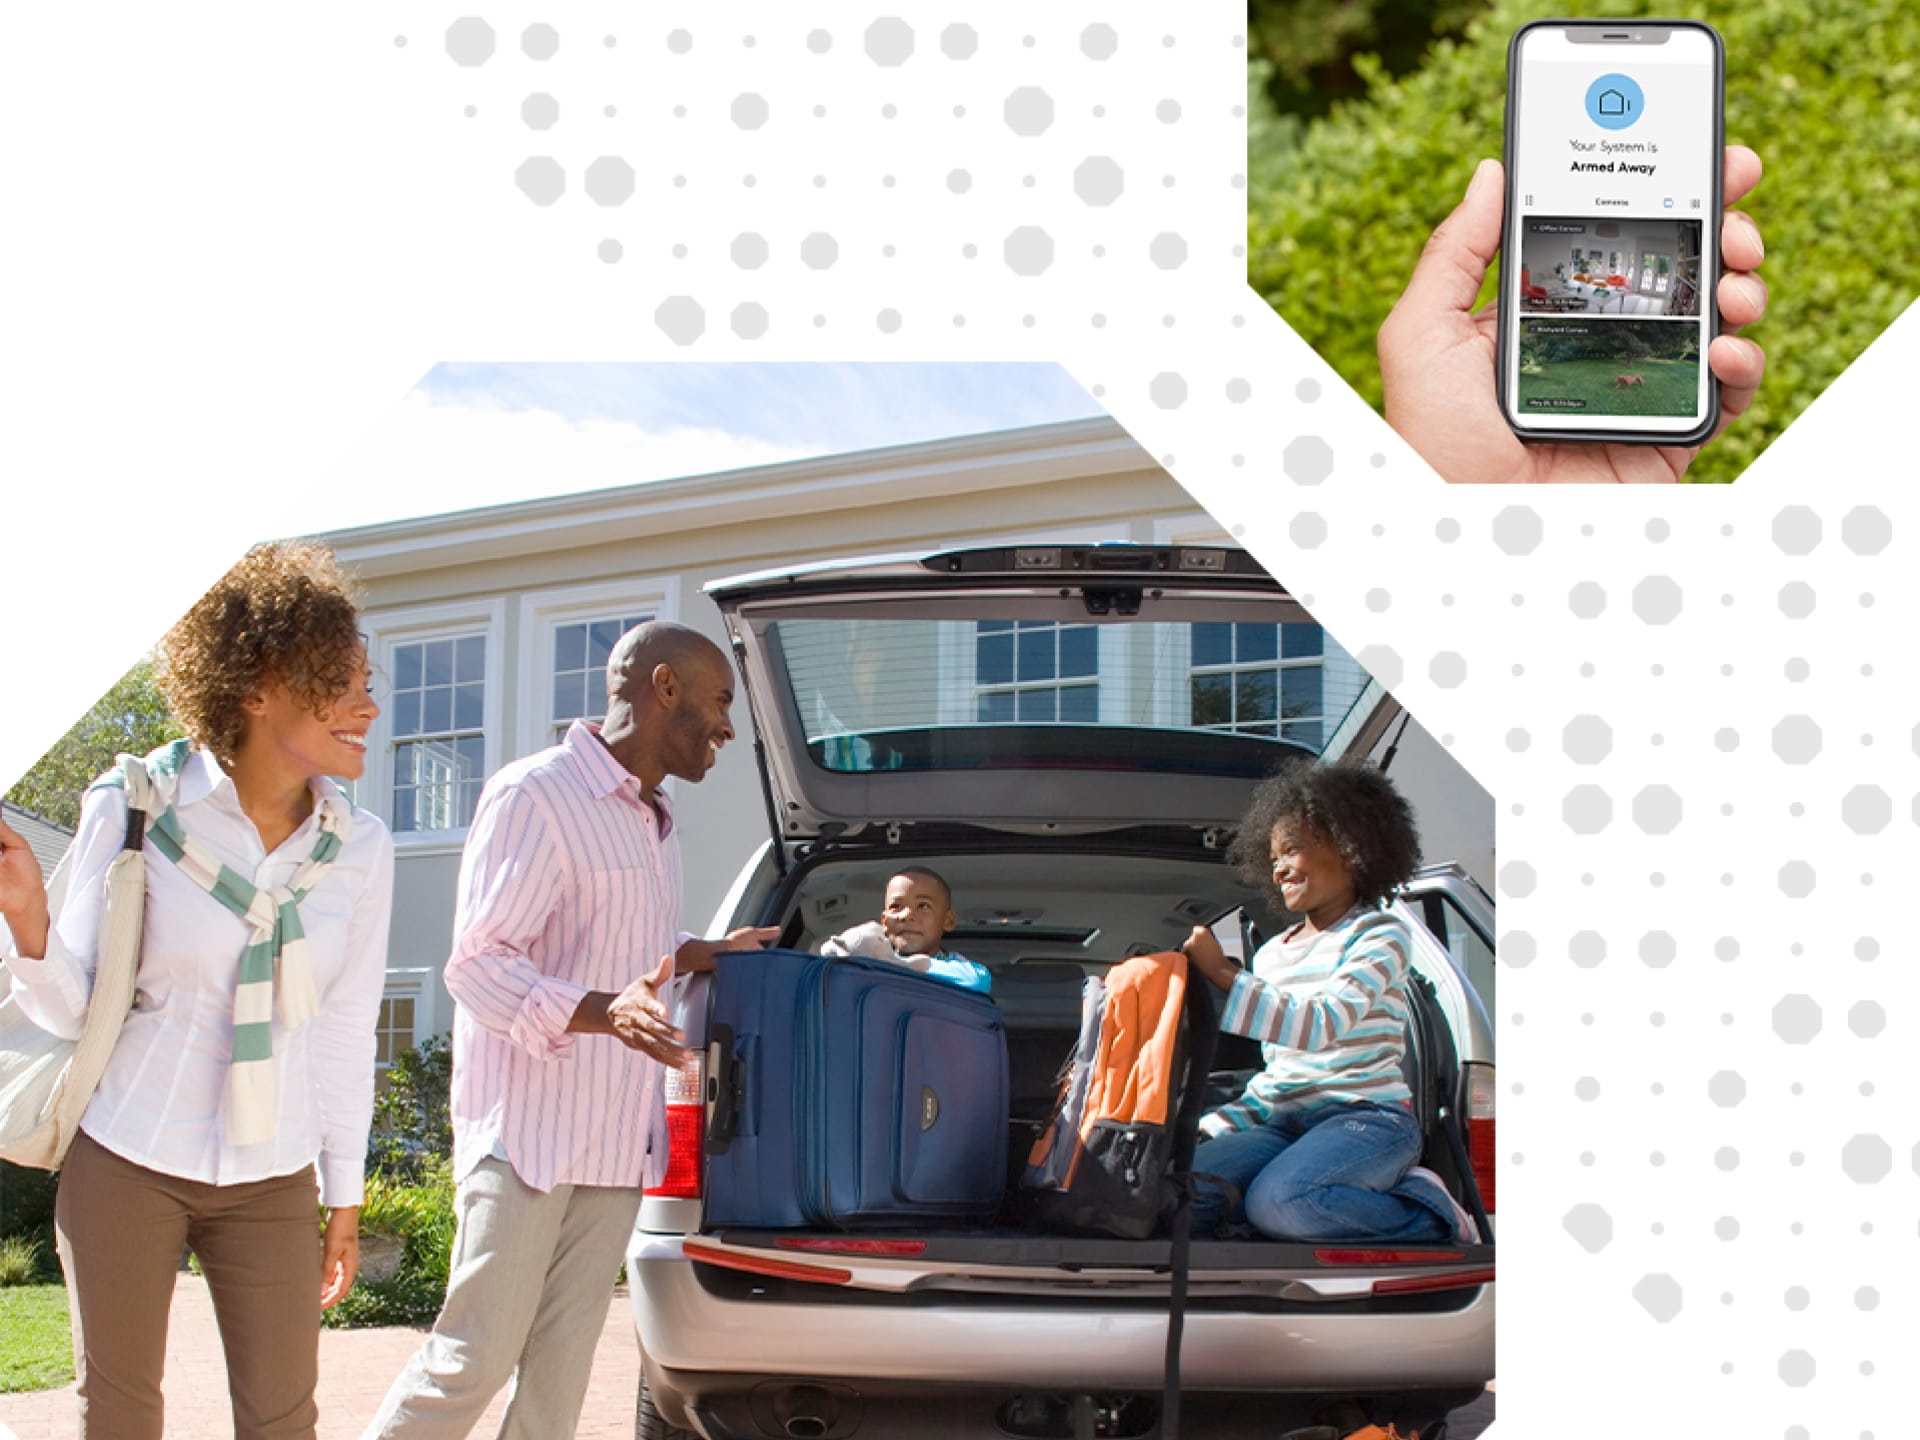 Family packing up their car to go on a trip and checking on their home in the ADT app